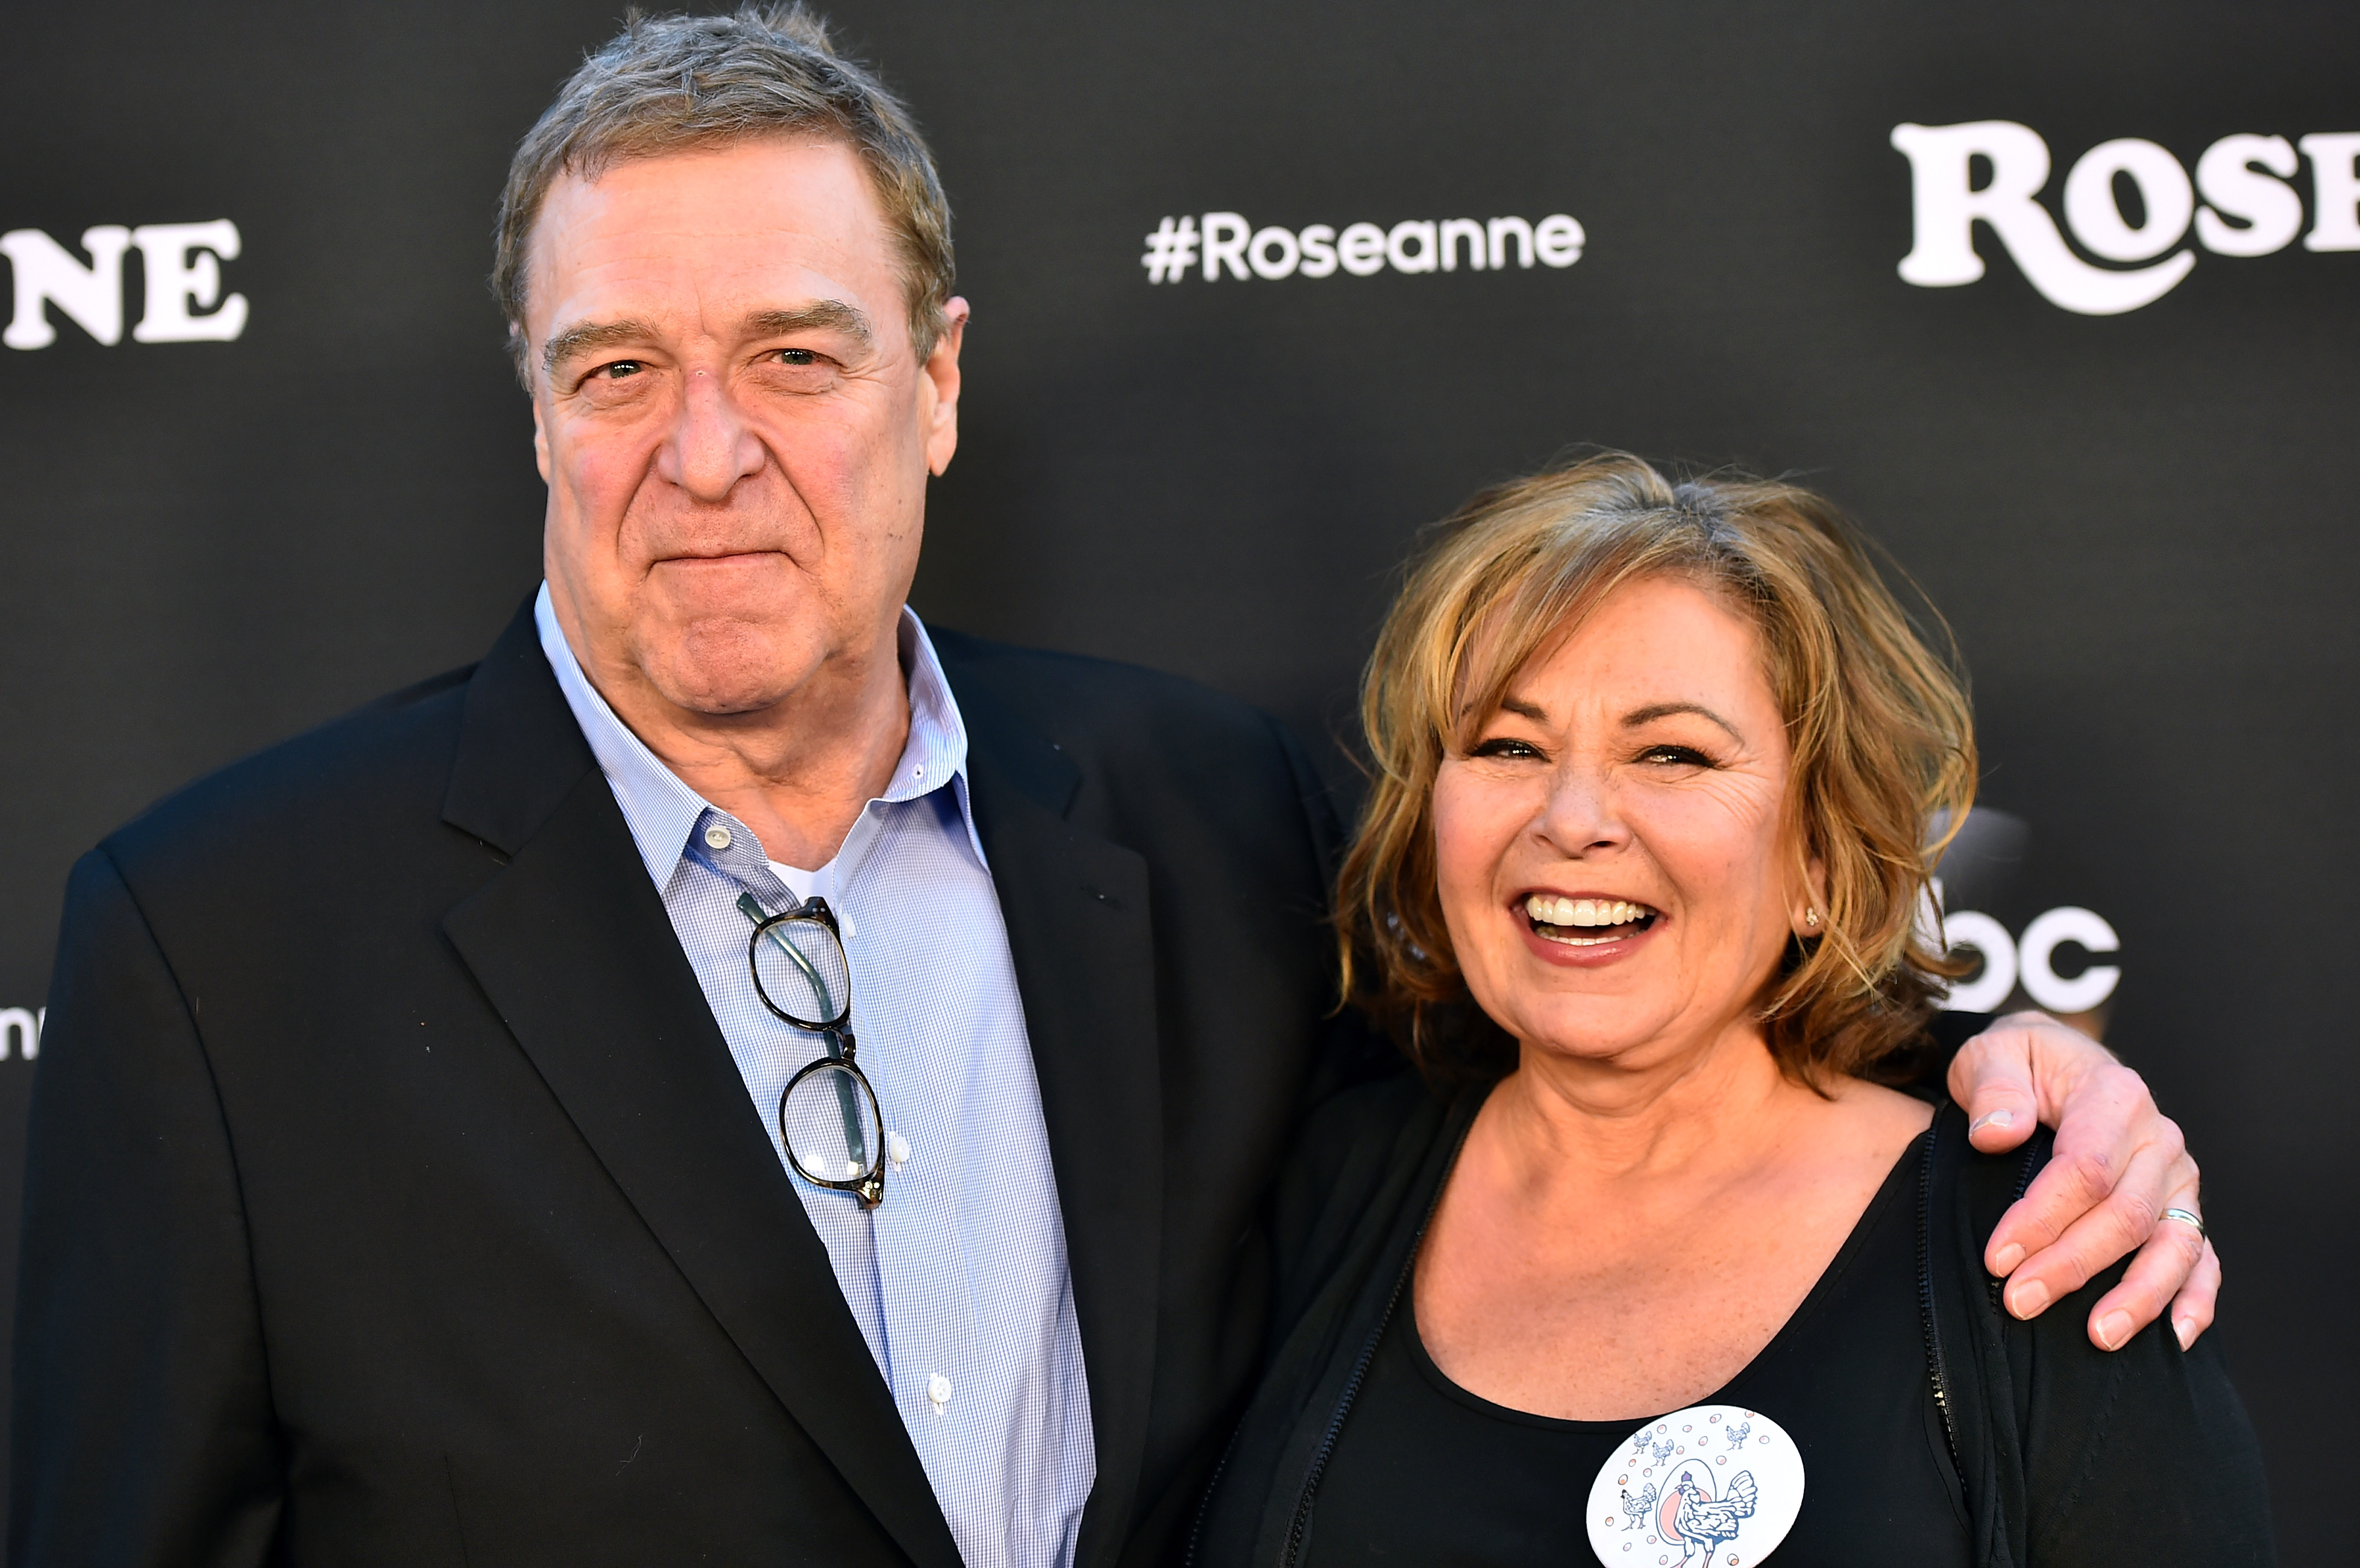 John Goodman and Roseanne Barr attend the premiere of ABC's "Roseanne" at Walt Disney Studio Lot on March 23, 2018, in Burbank, California. | Source: Getty Images